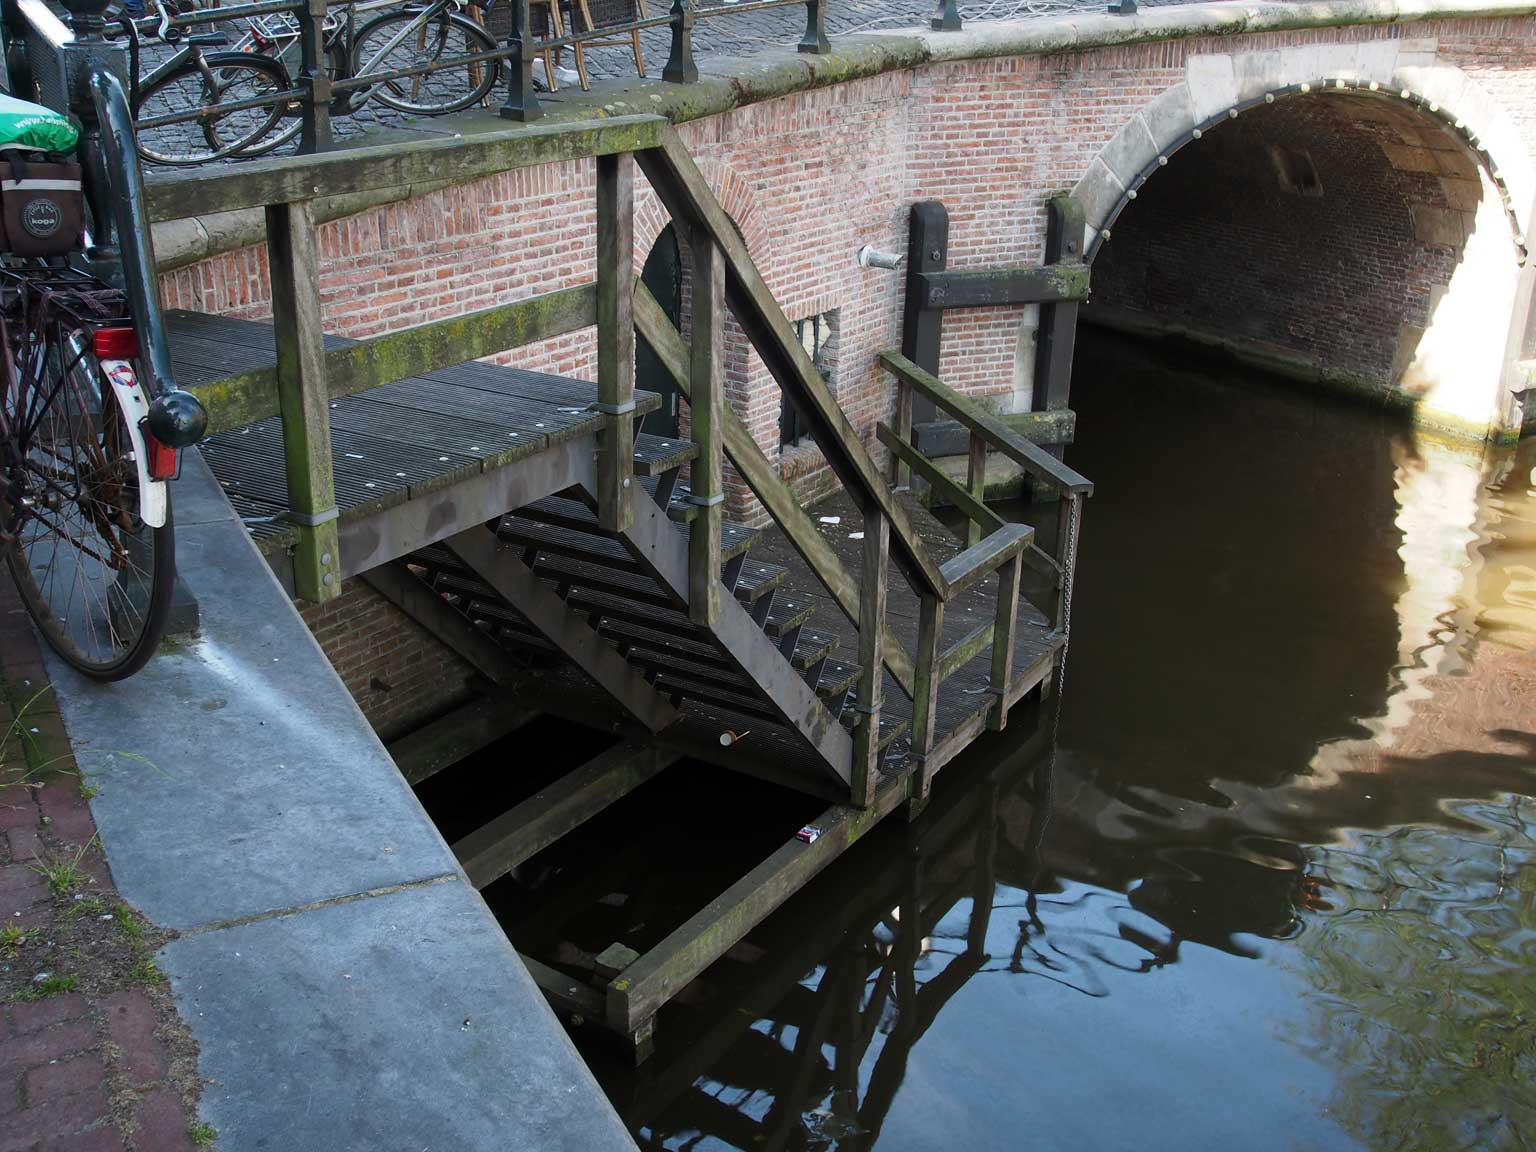 Access to the former prison below the Torensluis, Amsterdam